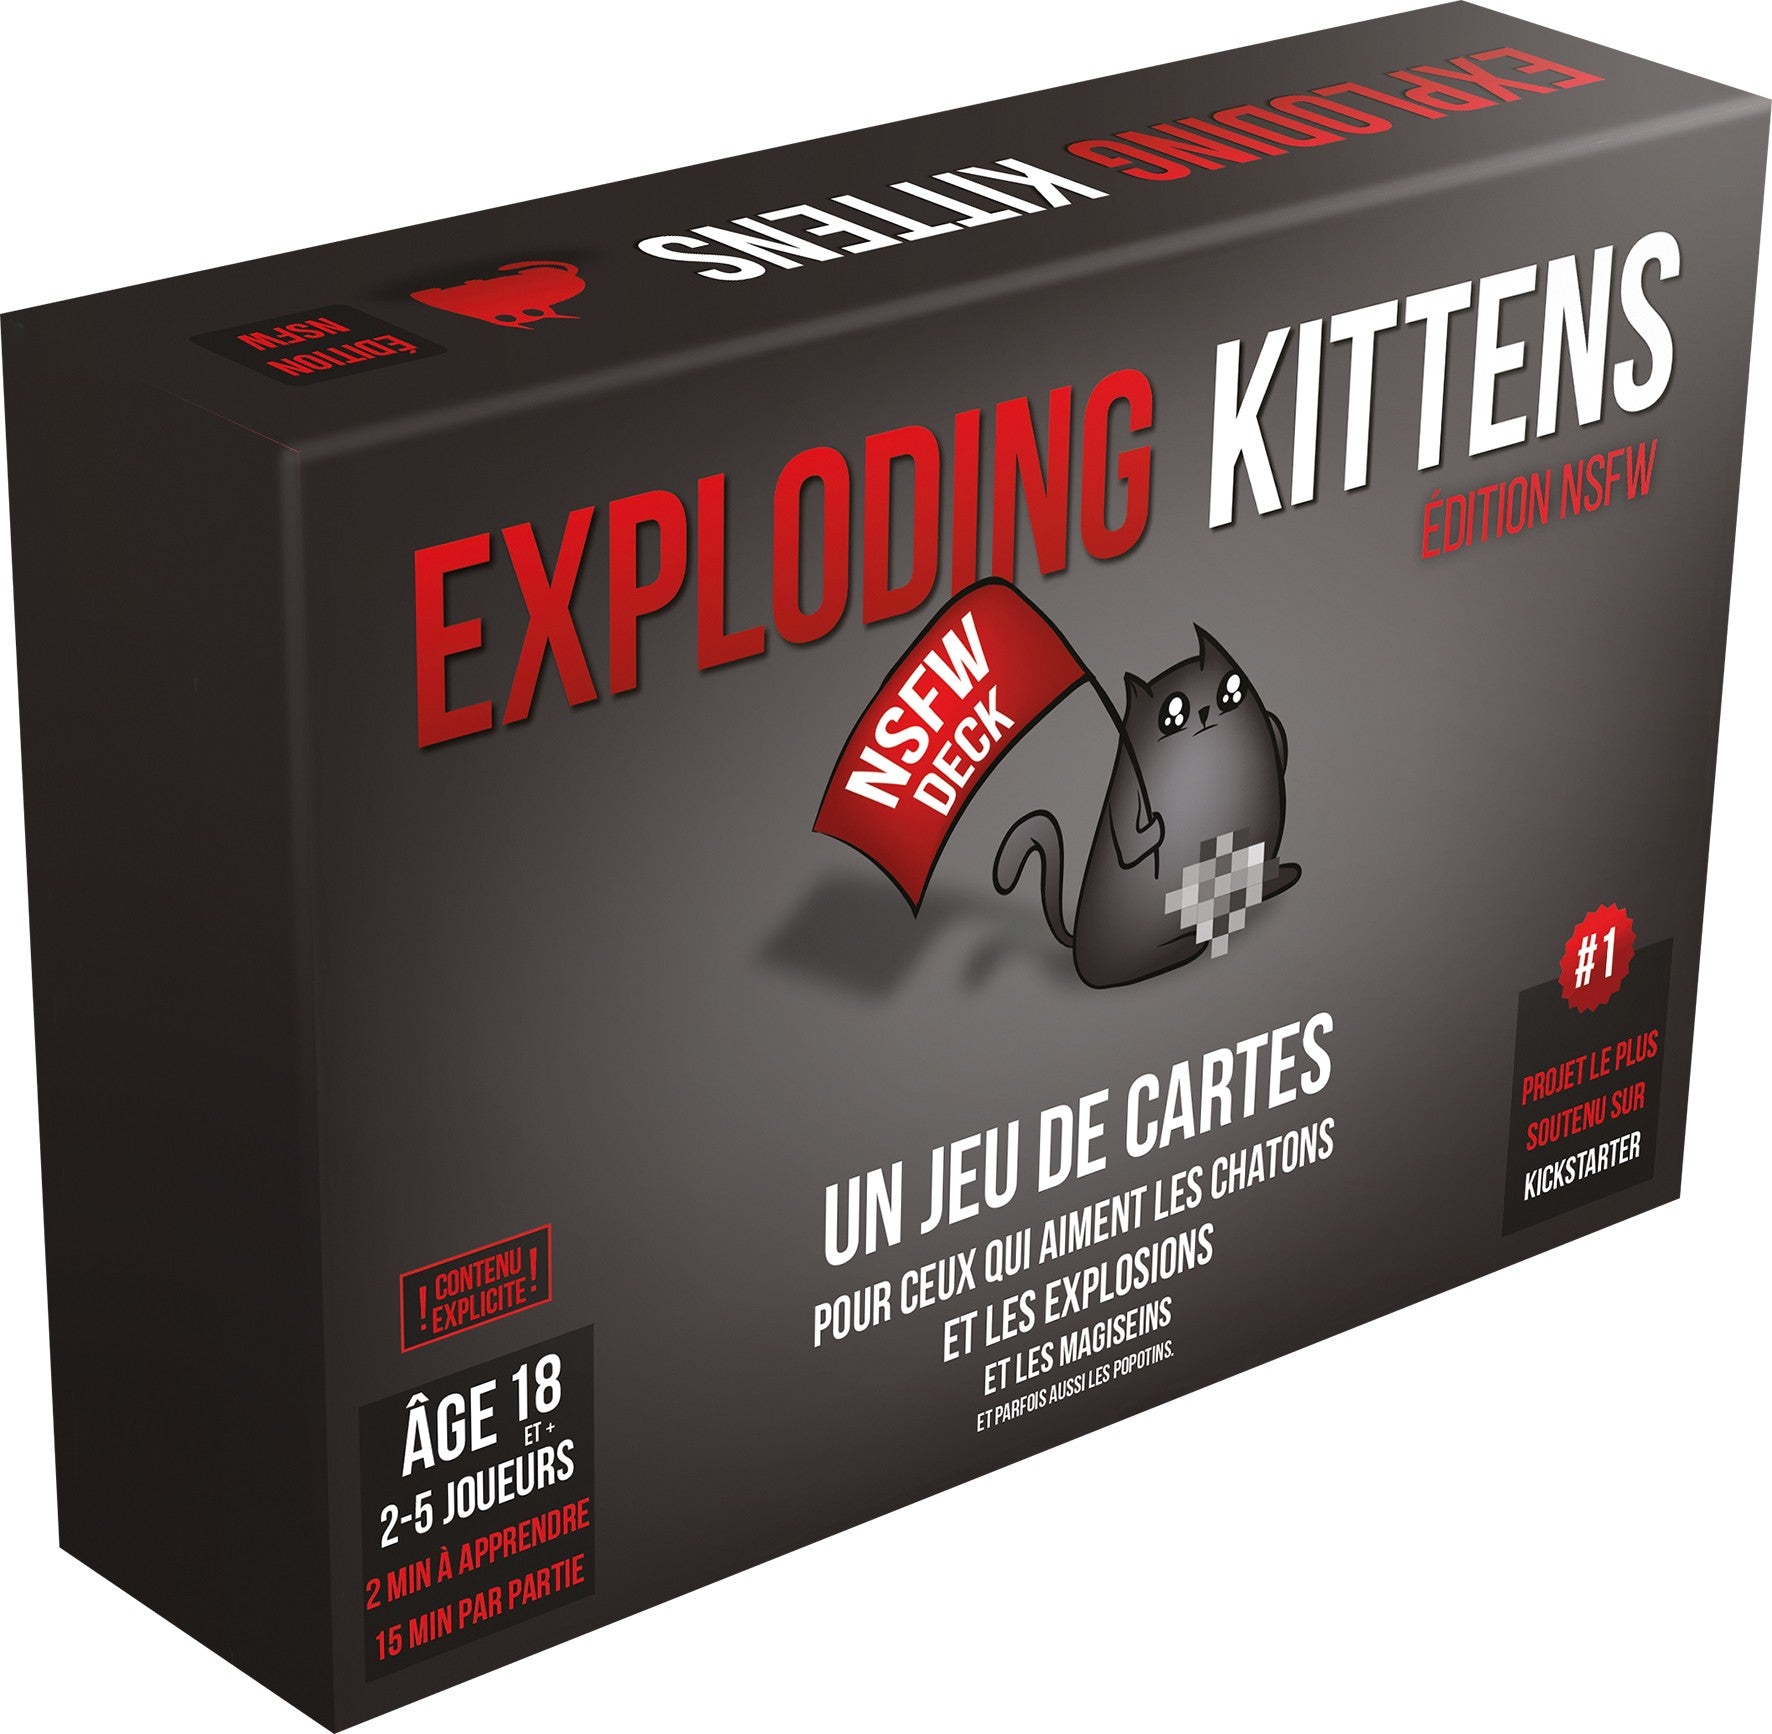 Exploding Kittens - Edition NSFW